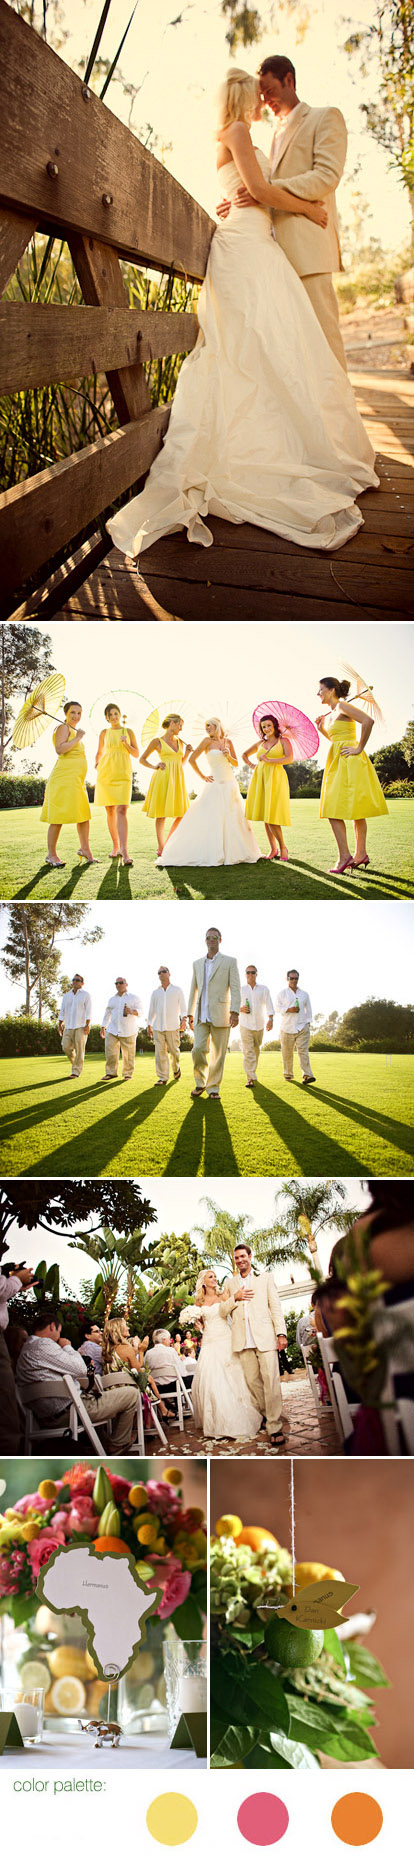 Summertime Rancho Valencia real wedding, images by Natalie Moser Photography